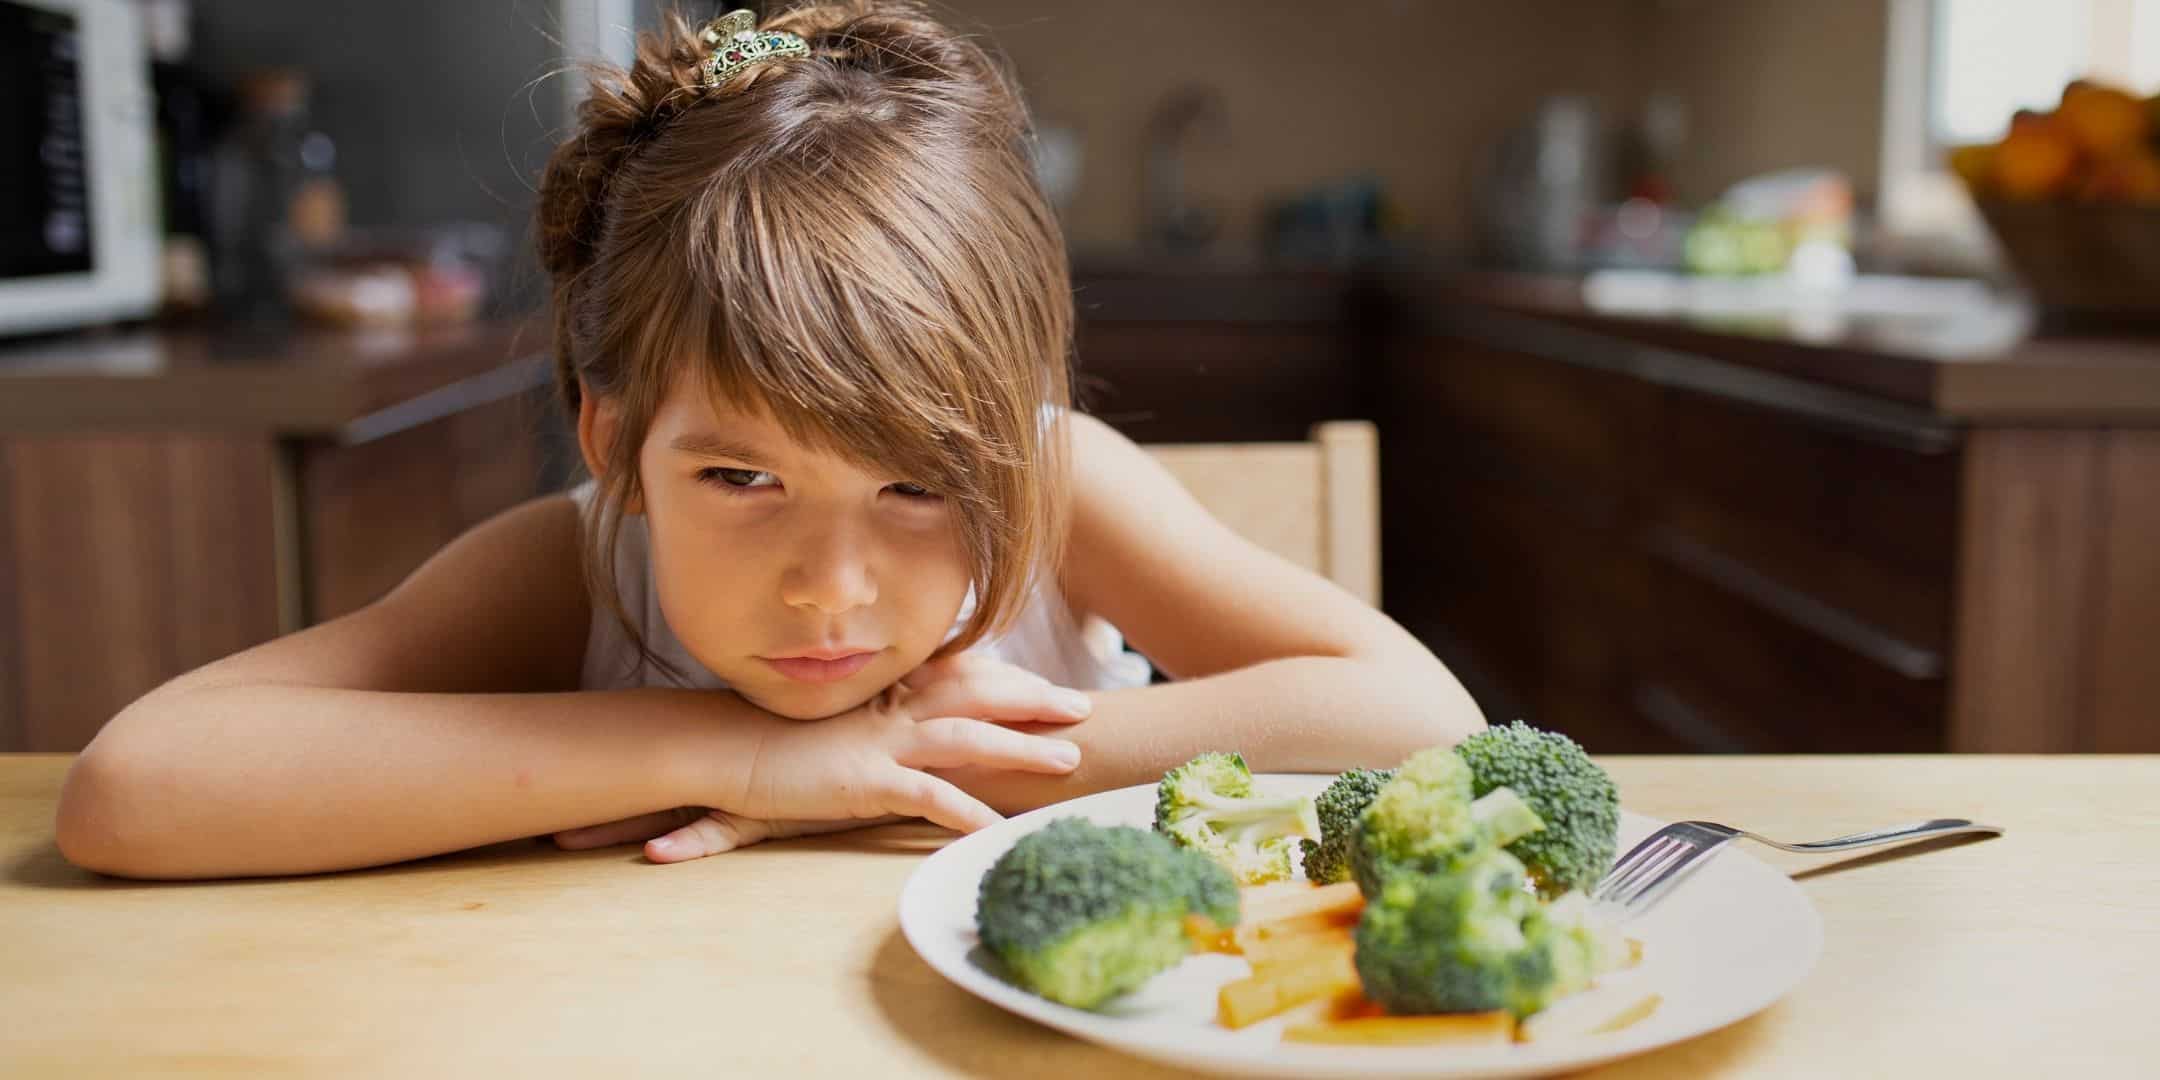 picky eater staring at plate of vegetables untouched